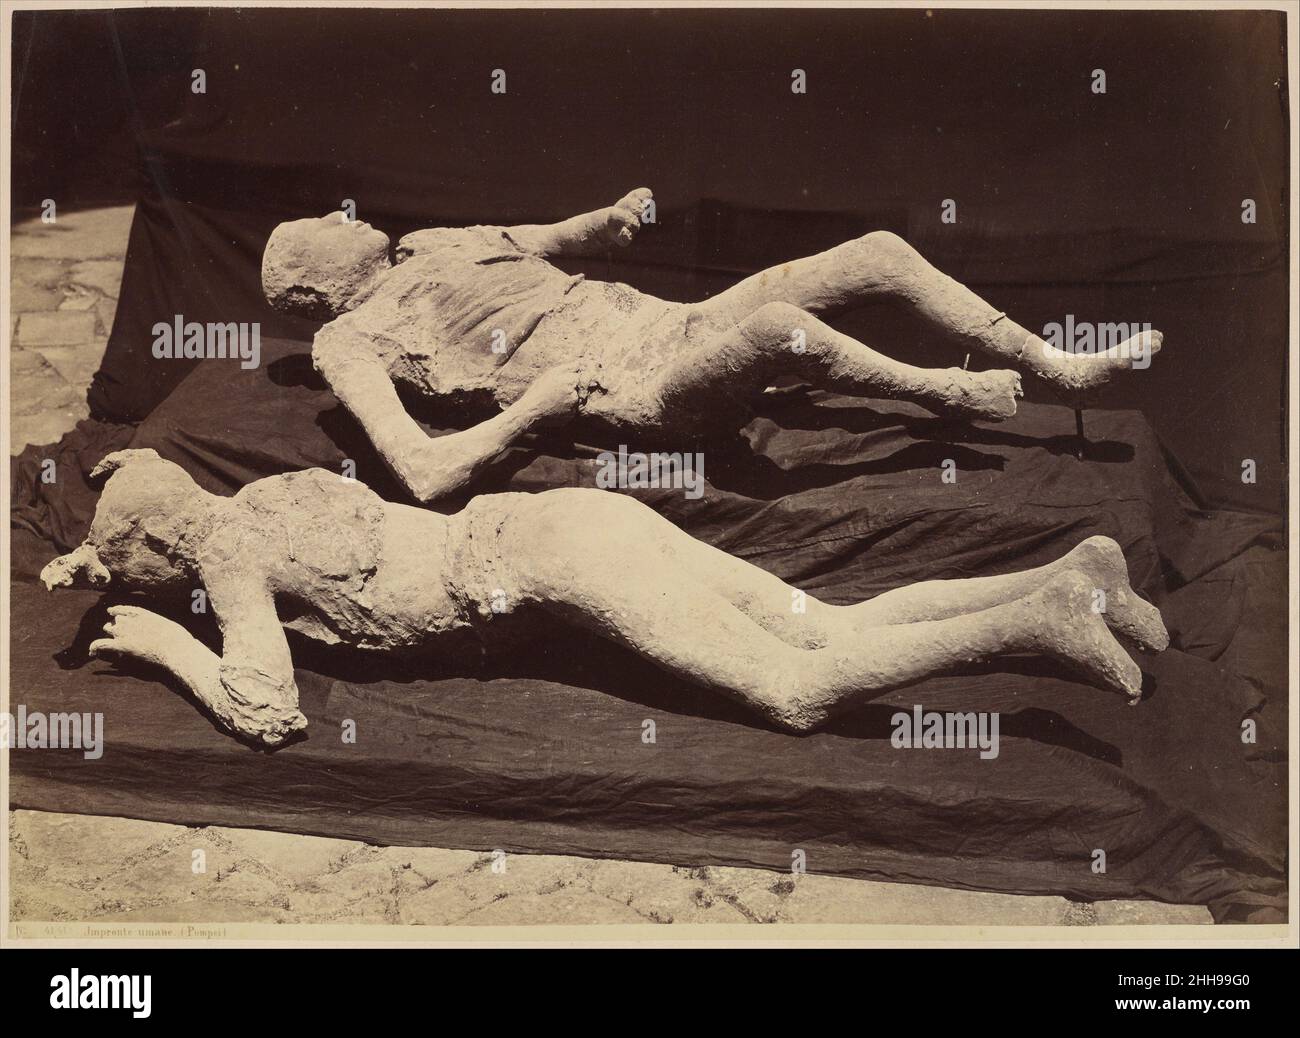 [Plaster Casts of Bodies, Pompeii] ca. 1875 Giorgio Sommer Italian, born Germany Much as photography fixes a moment in time, the eruption of Mount Vesuvius on August 24 in a.d. 79 preserved the city of Pompeii in eerie detail. Fascination with the site began with its excavation in the mid-eighteenth century and continues to this day. Sommer’s studio supplied views of Pompeii and other popular tourist destinations in Italy, Switzerland, and Austria in the era before visitors were equipped to make their own photographic records. Adopting the viewpoint of a gawking spectator, Sommer’s image offer Stock Photo